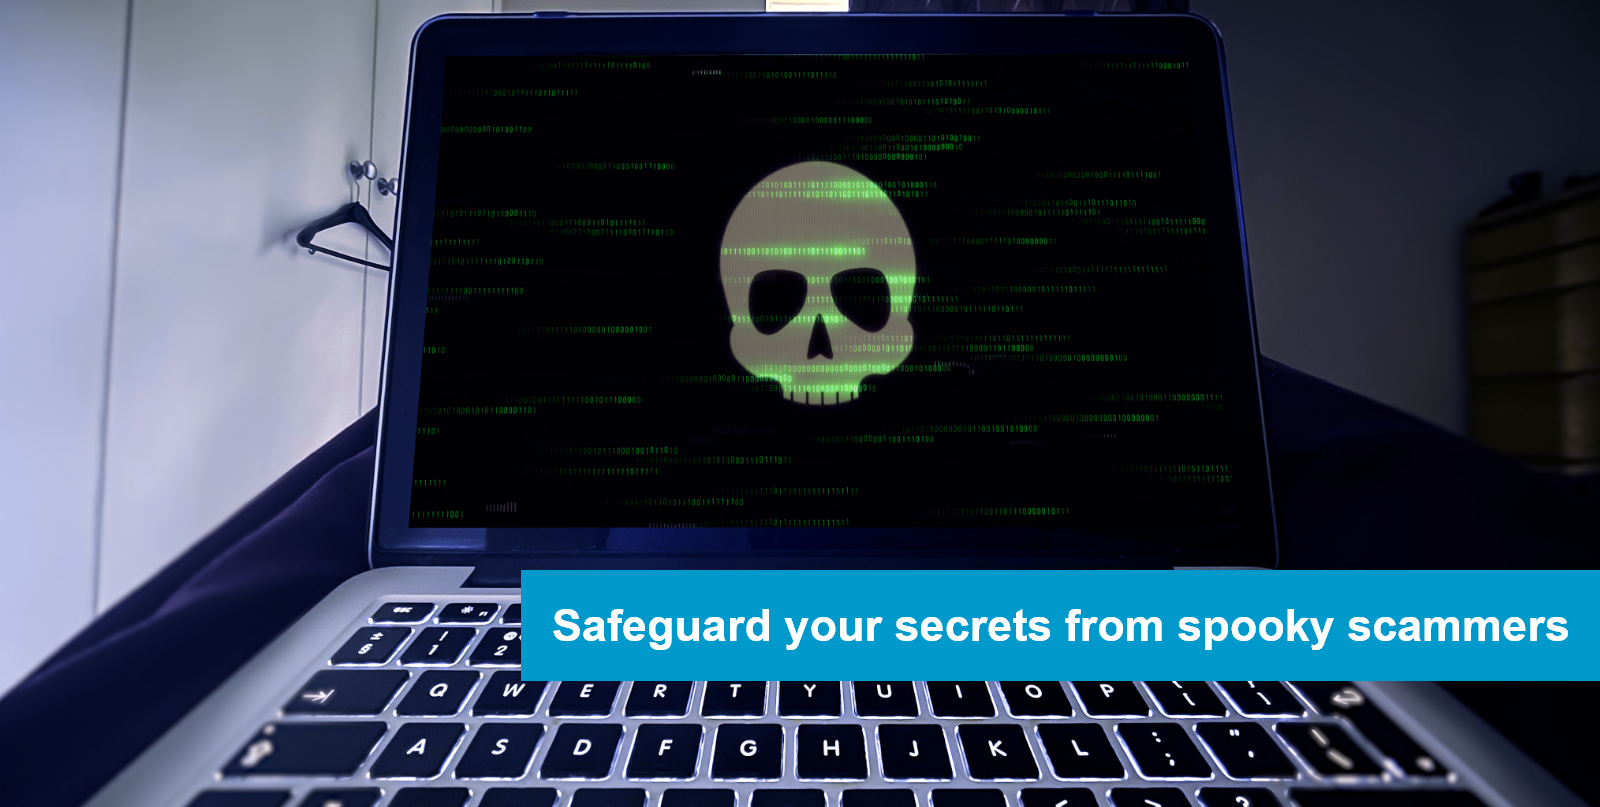 Safeguard your secrets from spooky scammers